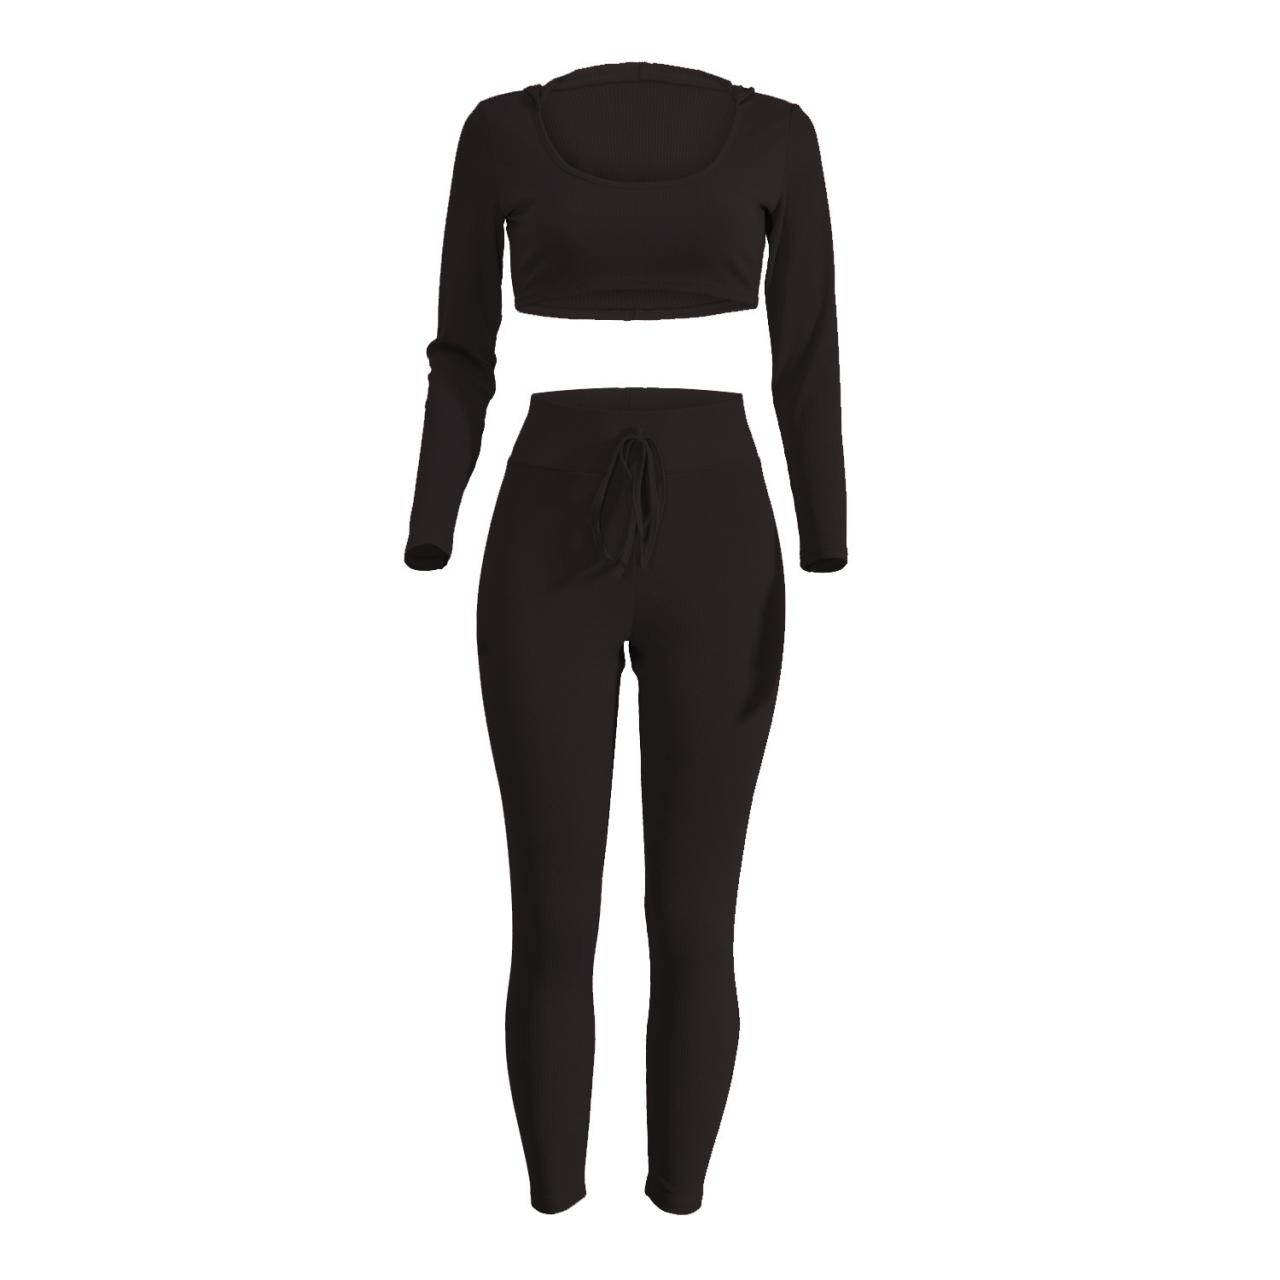 Spring Women Casaul Tracksuit Long Sleeve Hoodie+Pants Two pieces Leisure Sets Nightclub Party Suits black